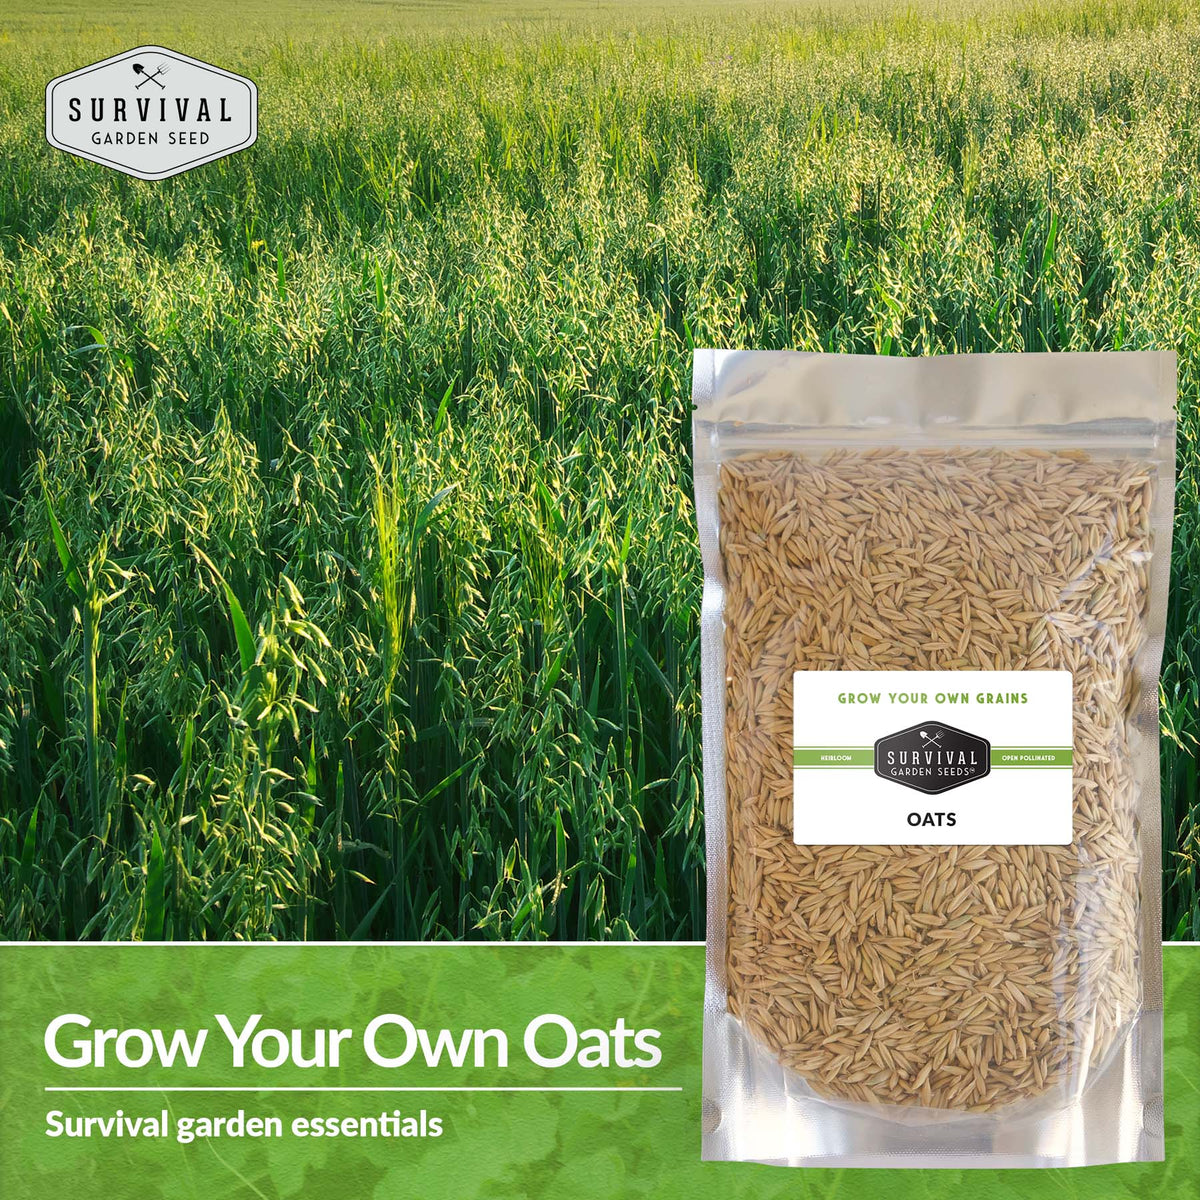 Grow your own oats